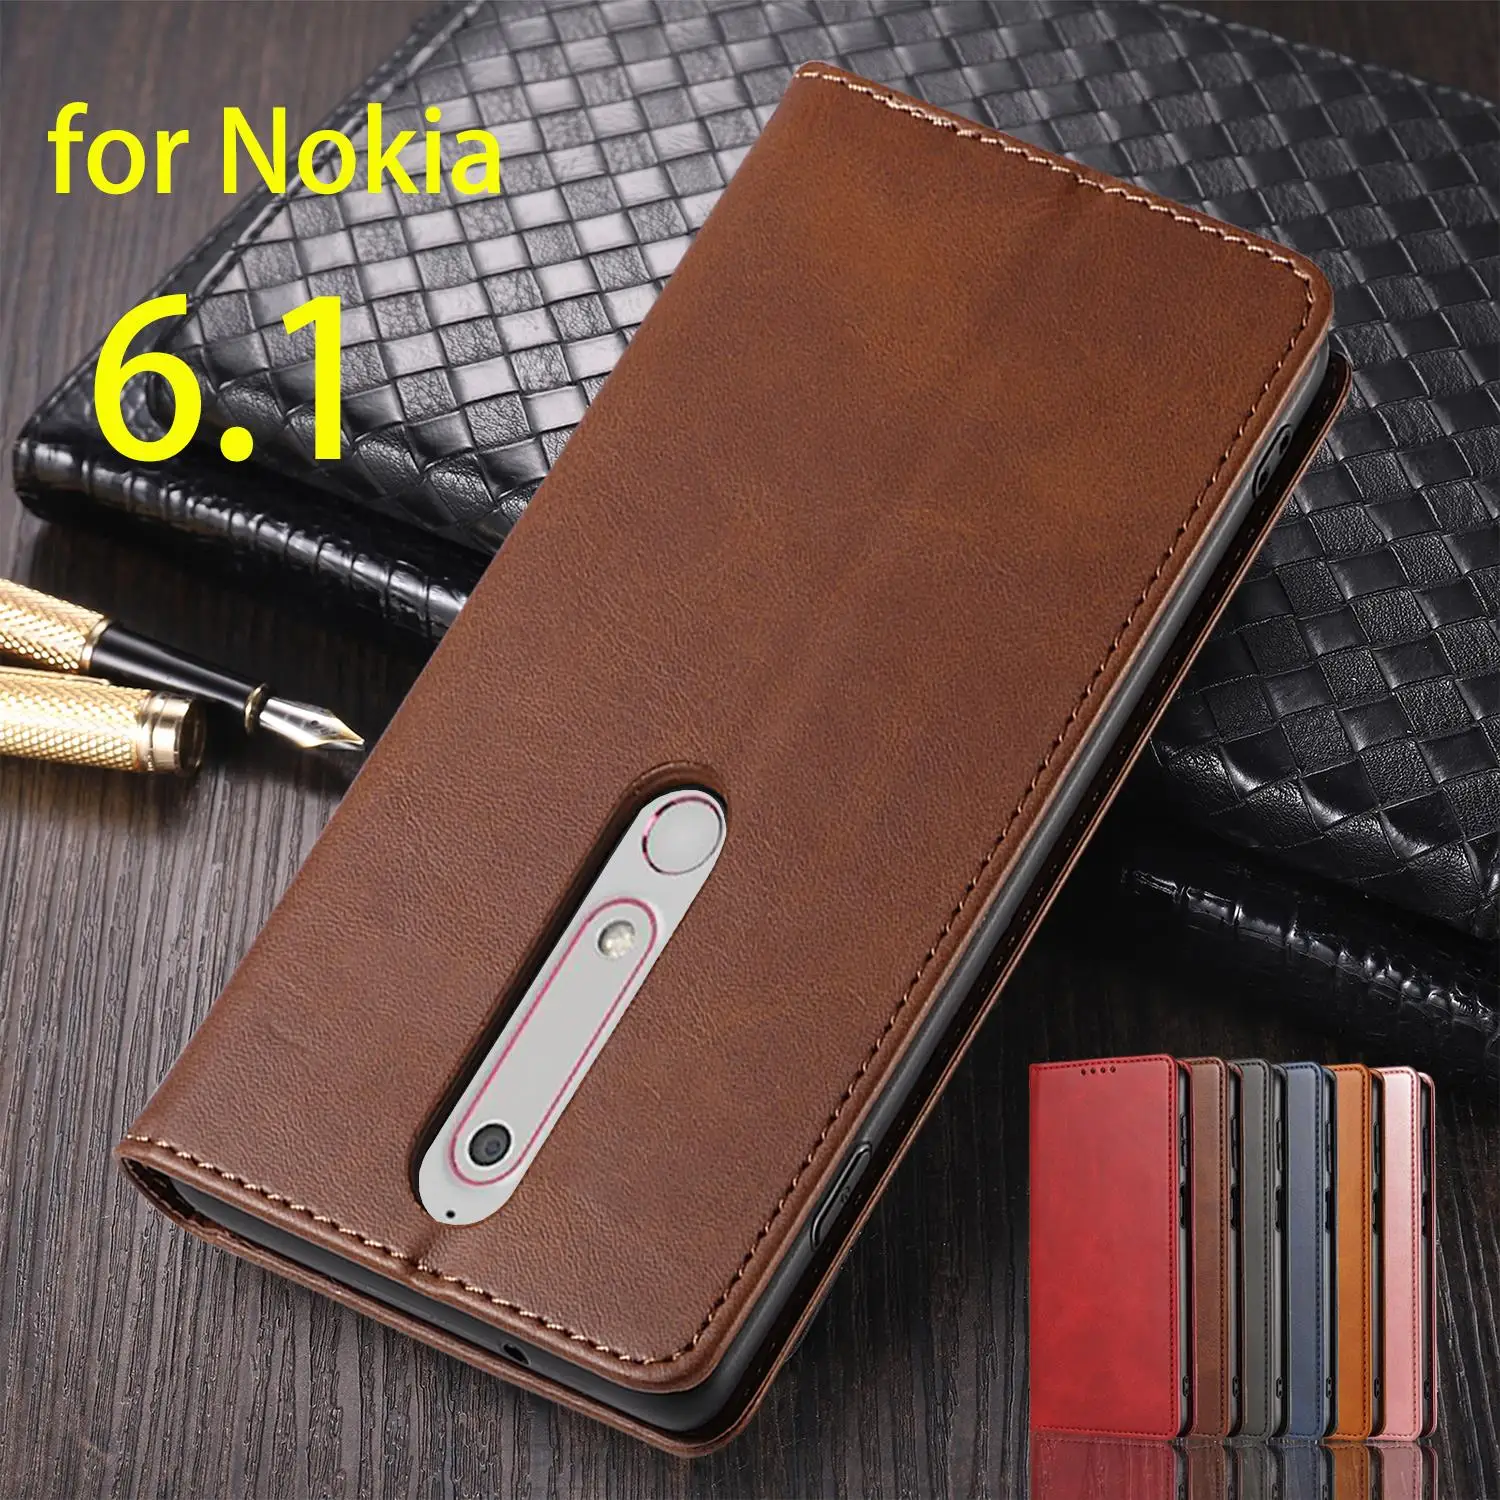 

Leather Case for Nokia 6.1/ Nokia 6 2018 Card Holder Holster Magnetic Attraction Cover Wallet Flip Case Capa Fundas Coque